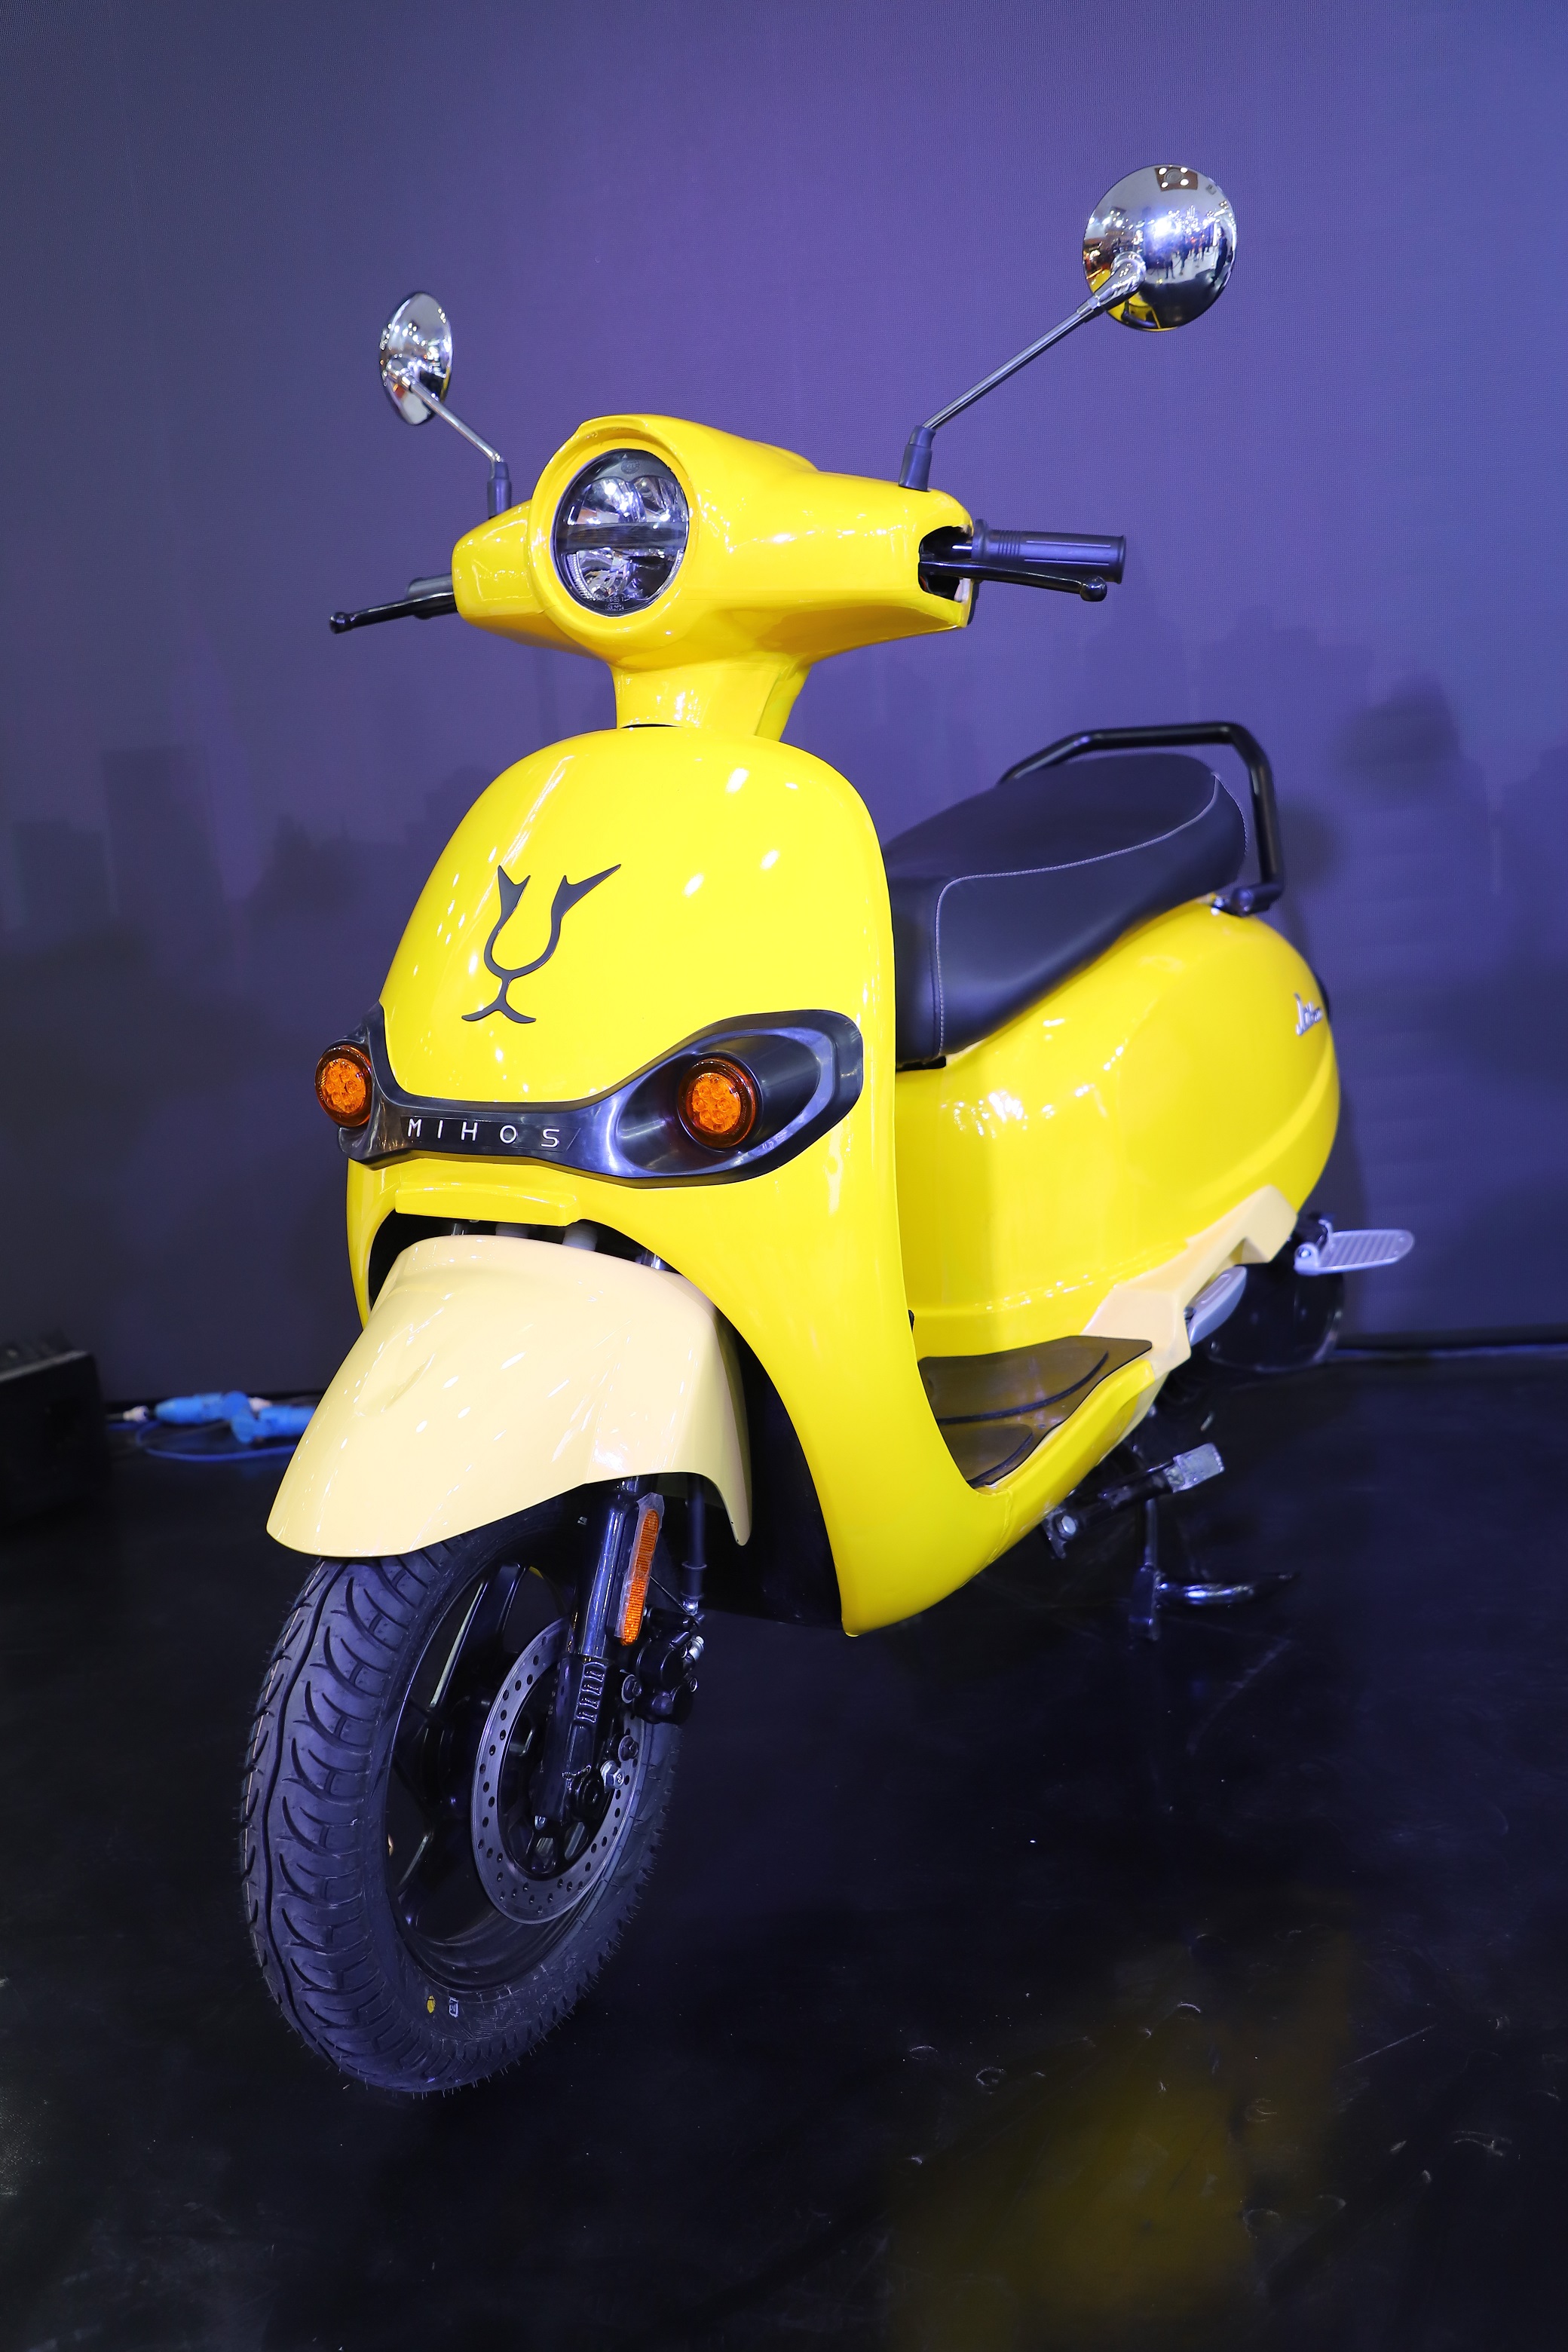 joy-e-bike-opens-online-booking-for-its-new-electric-scooter-mihos